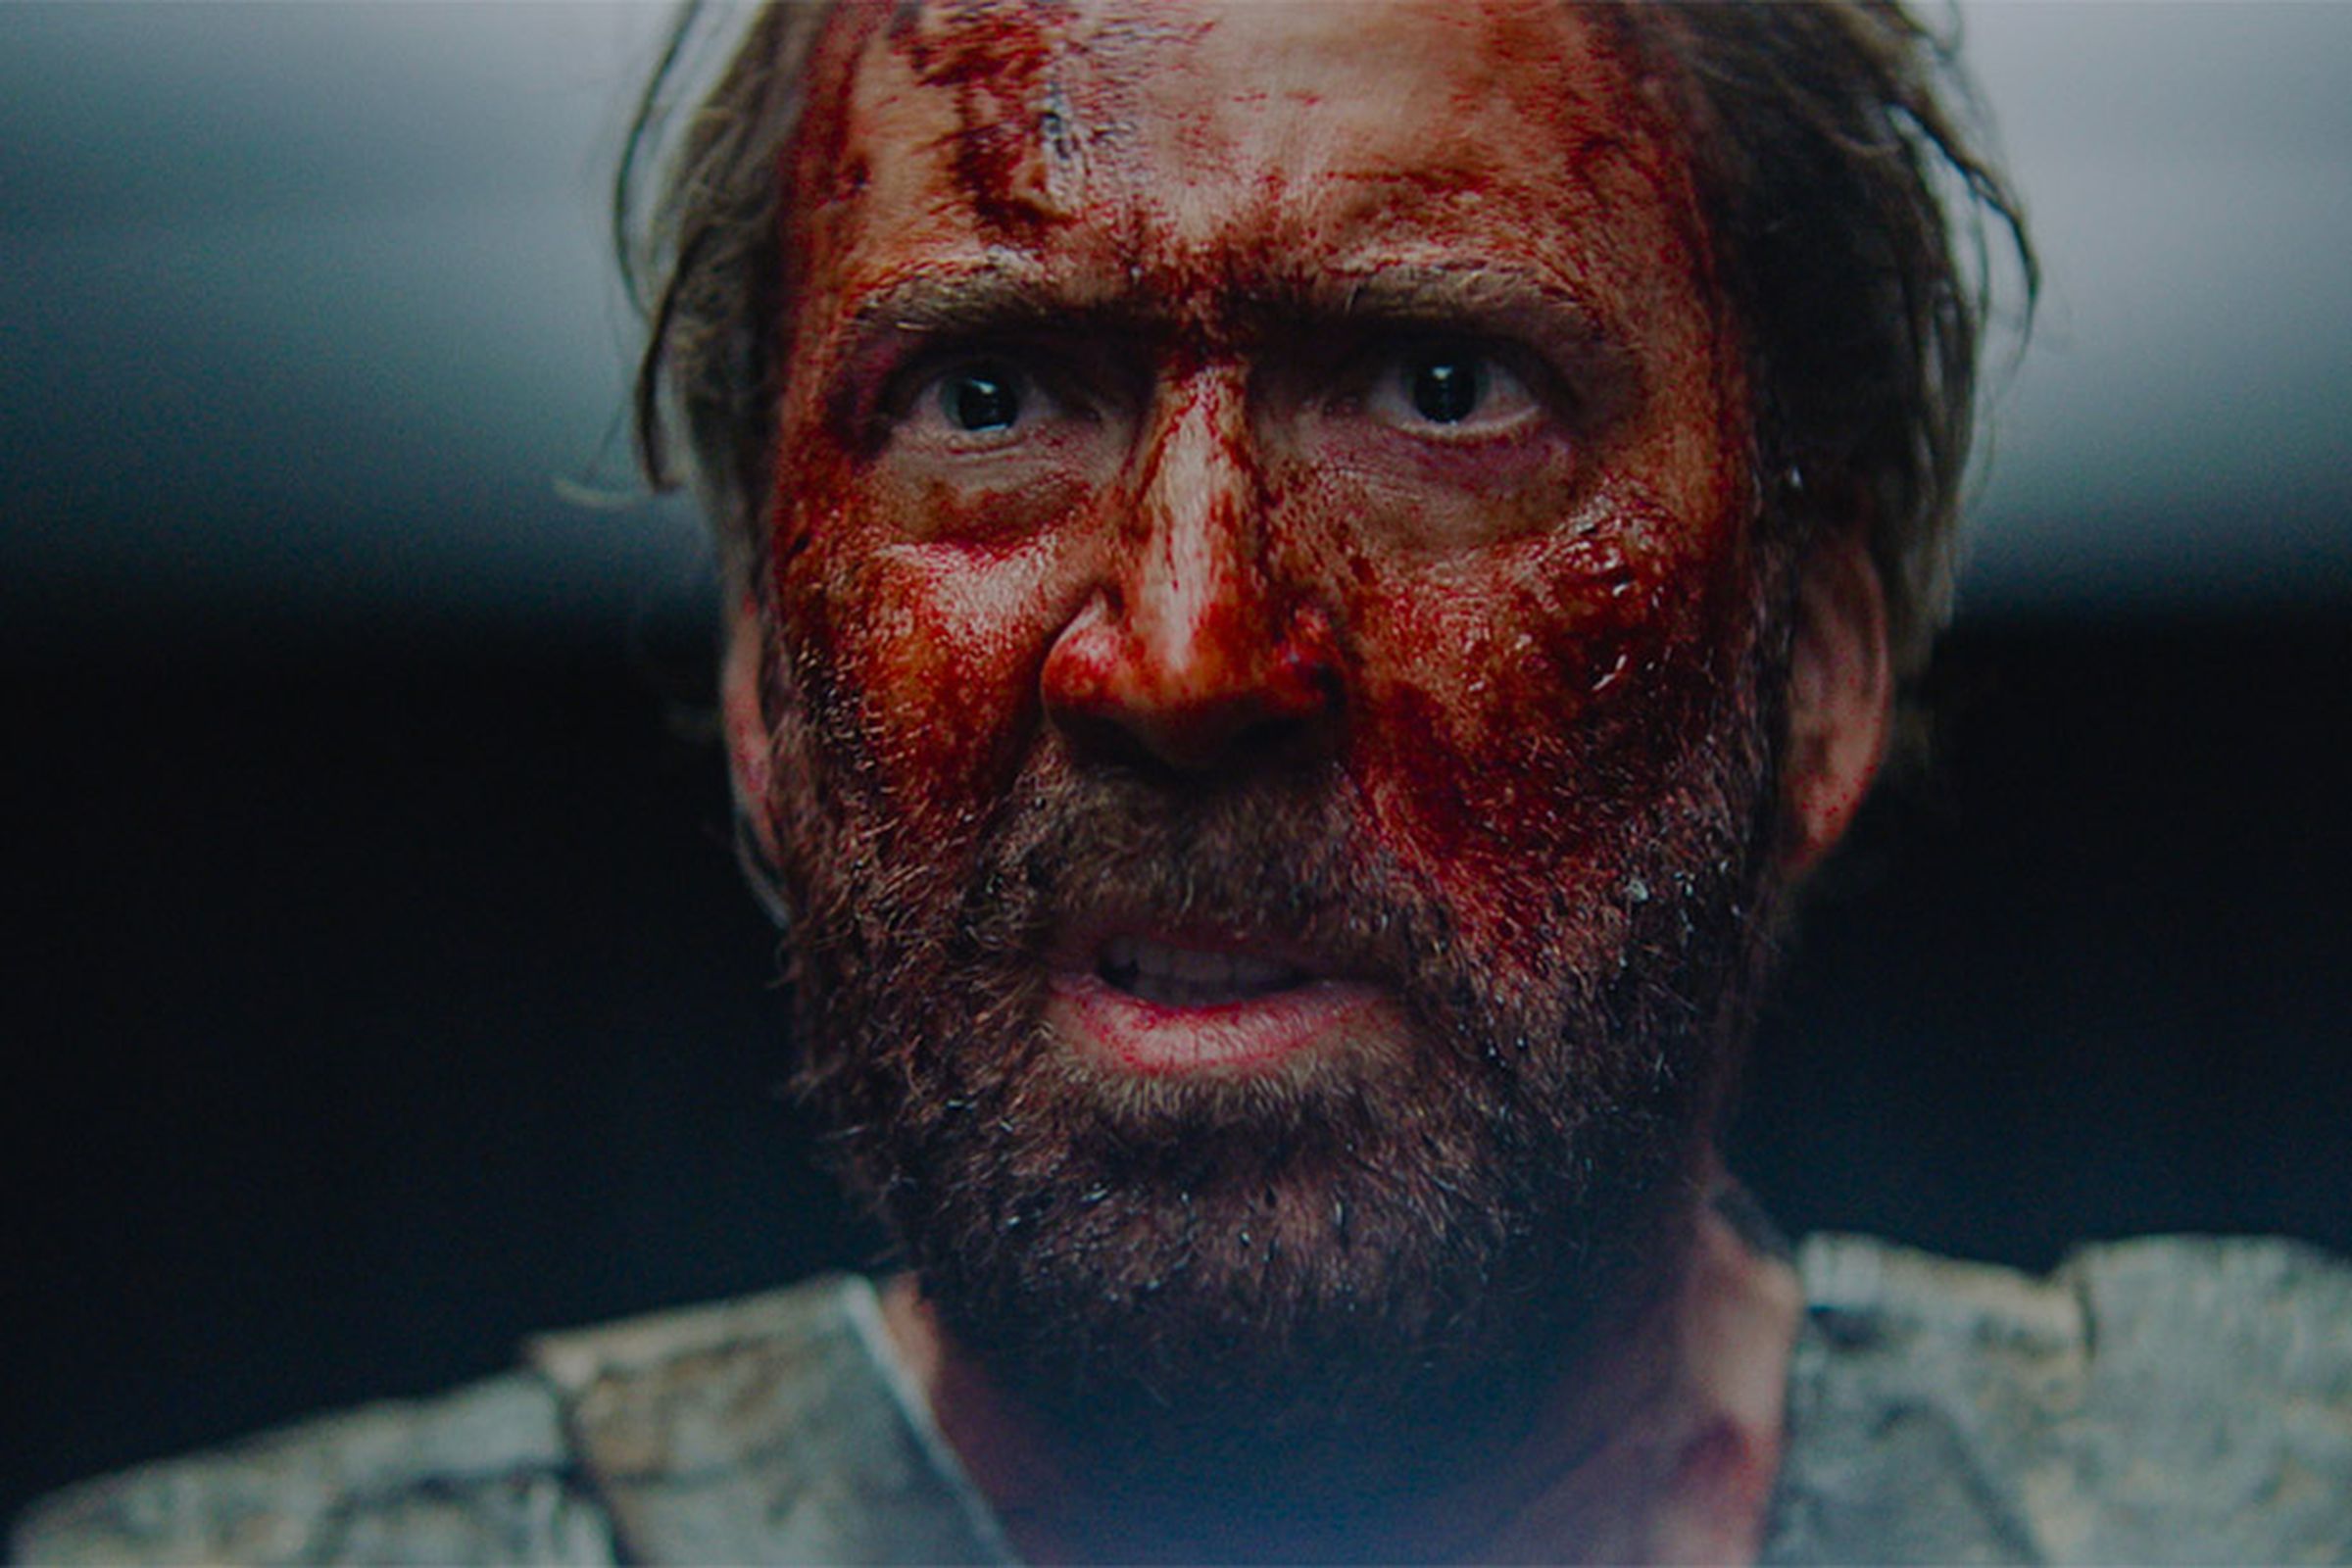 Nicolas Cage appears in Mandy by Panos Cosmatos